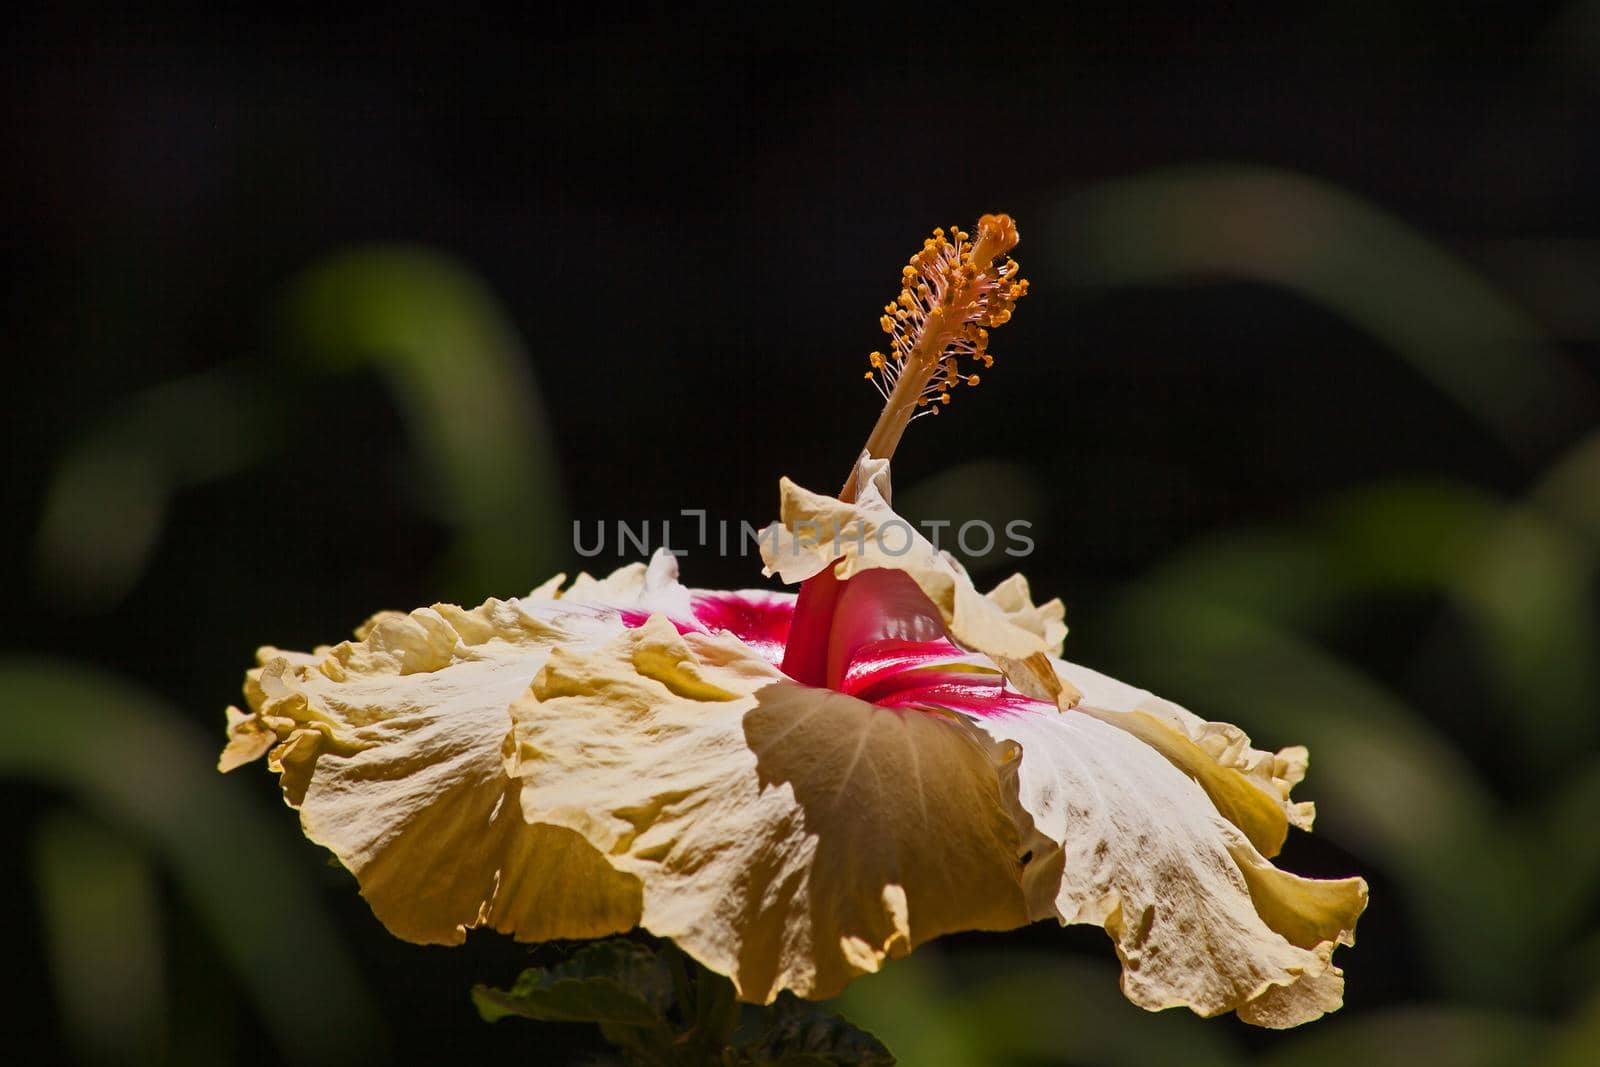 A close-up imager of a yellow Hibiscus flowe.